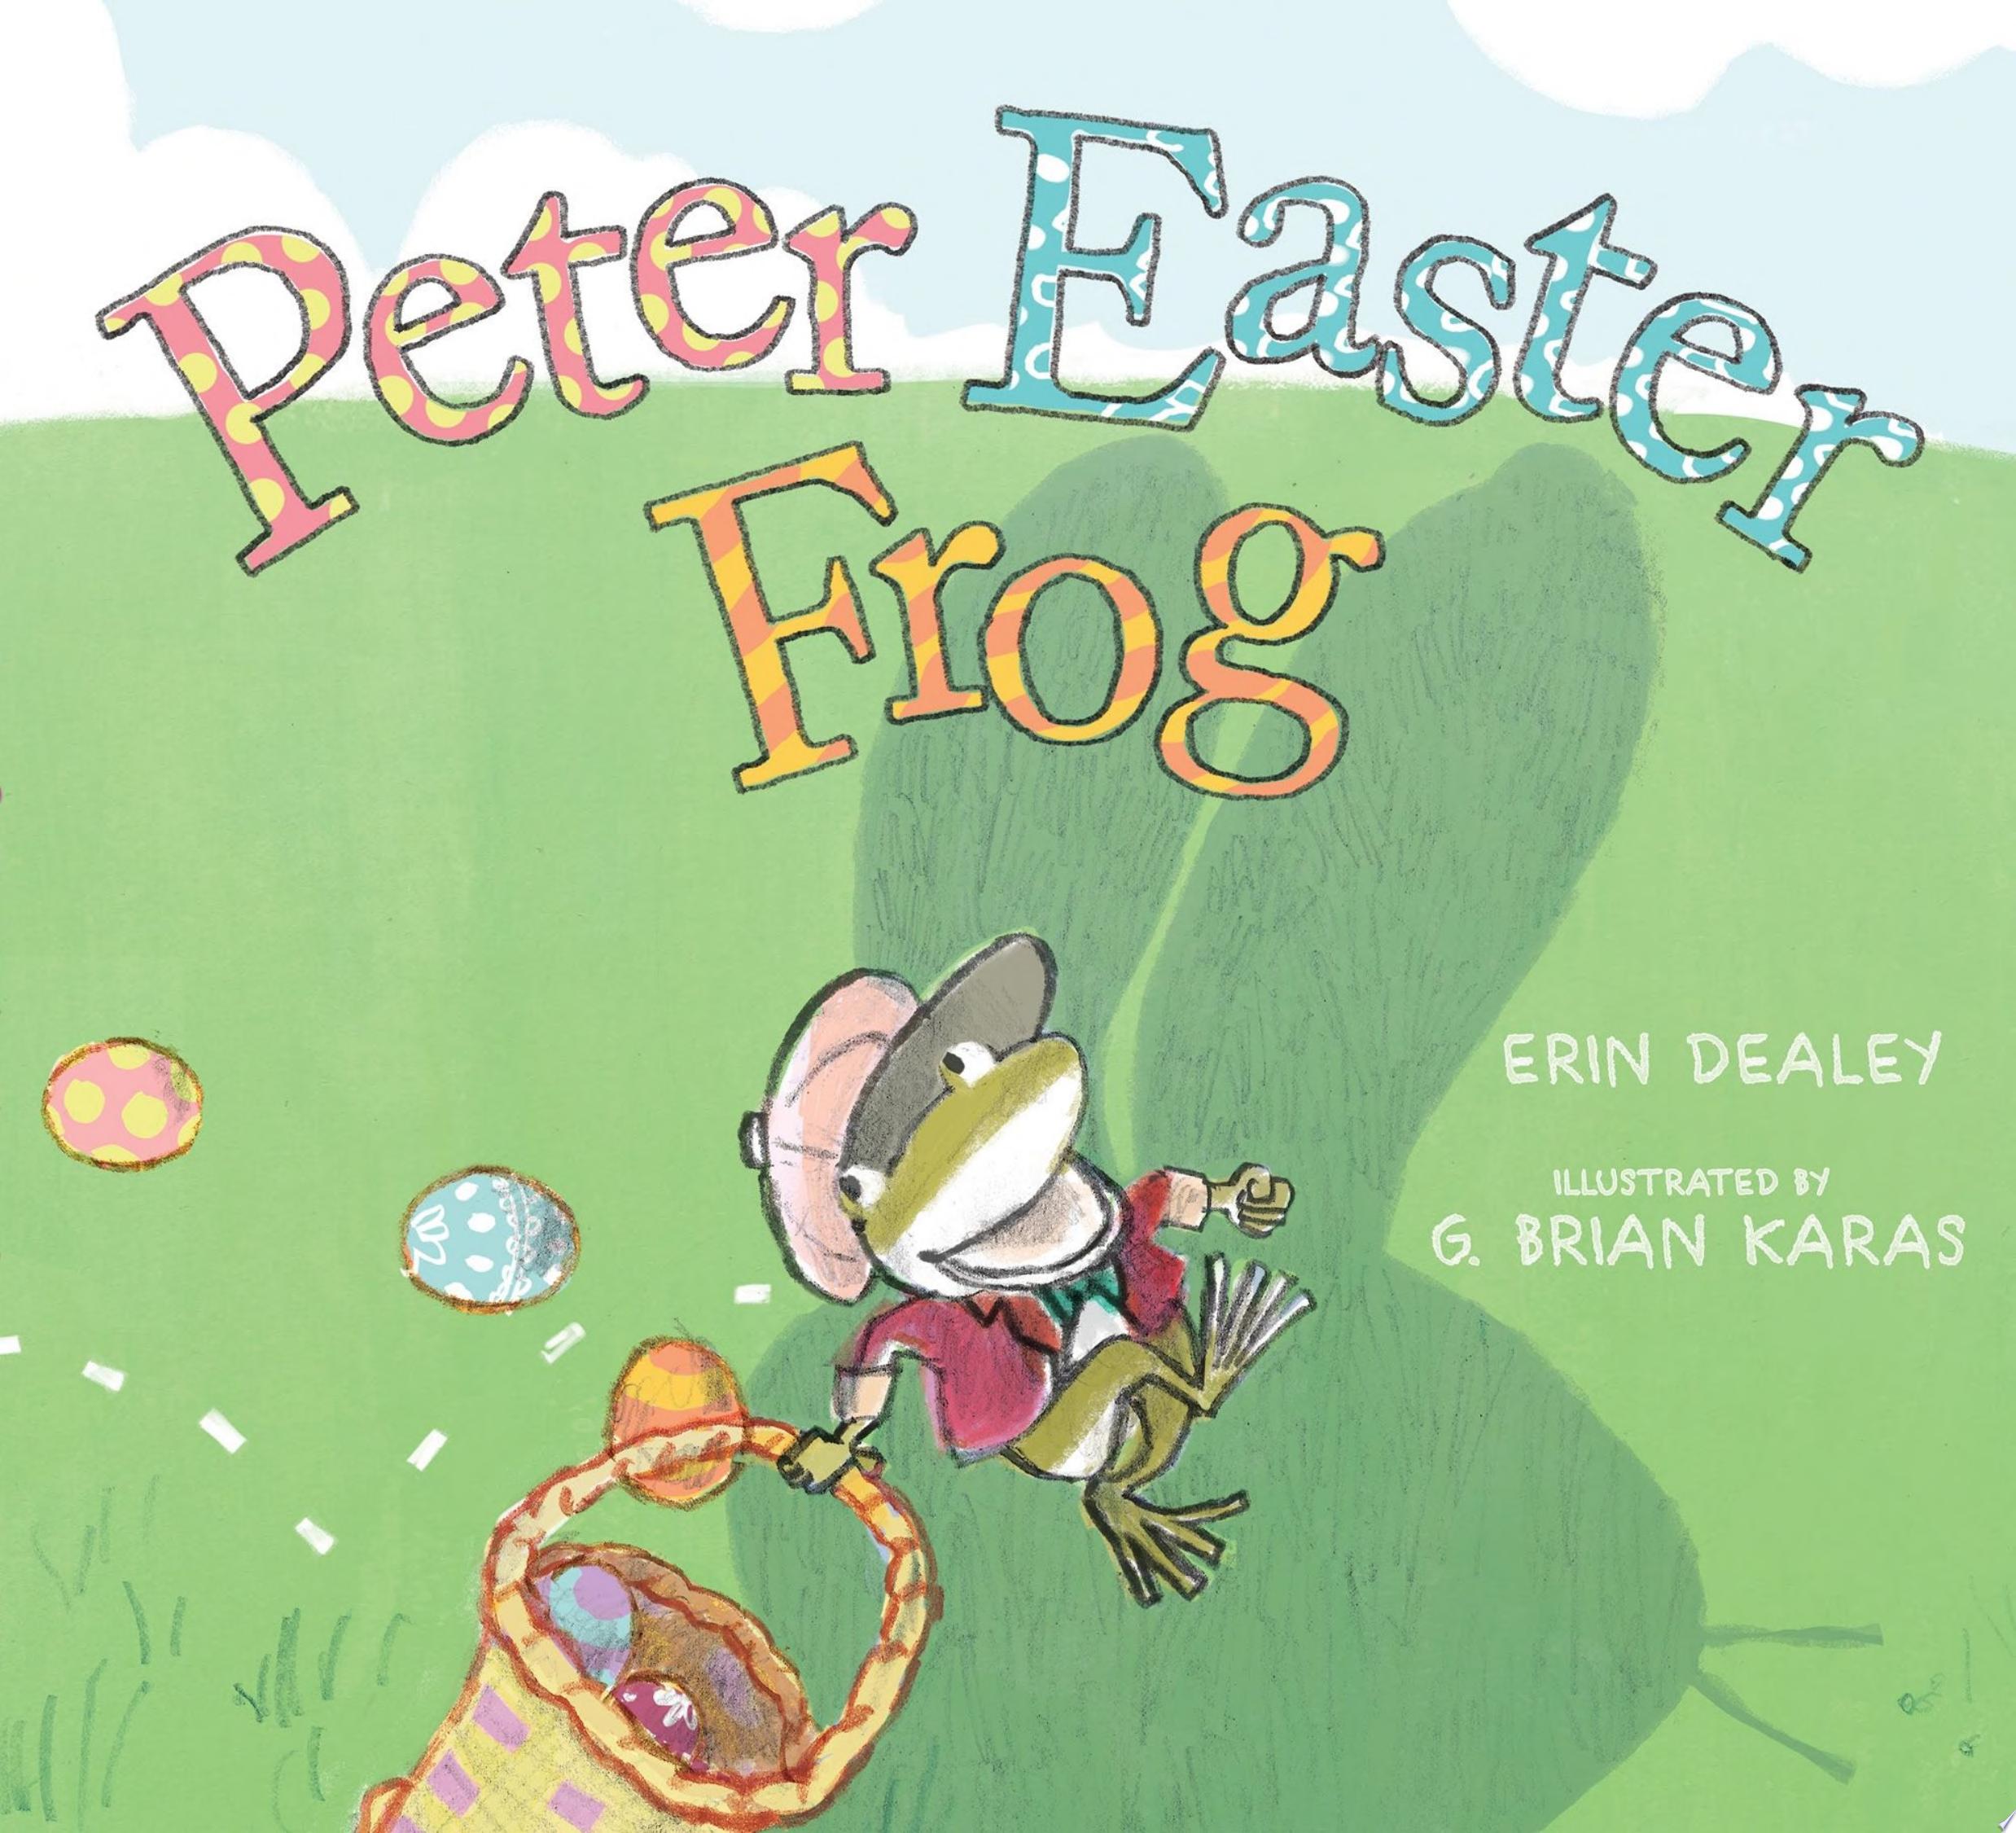 Image for "Peter Easter Frog"